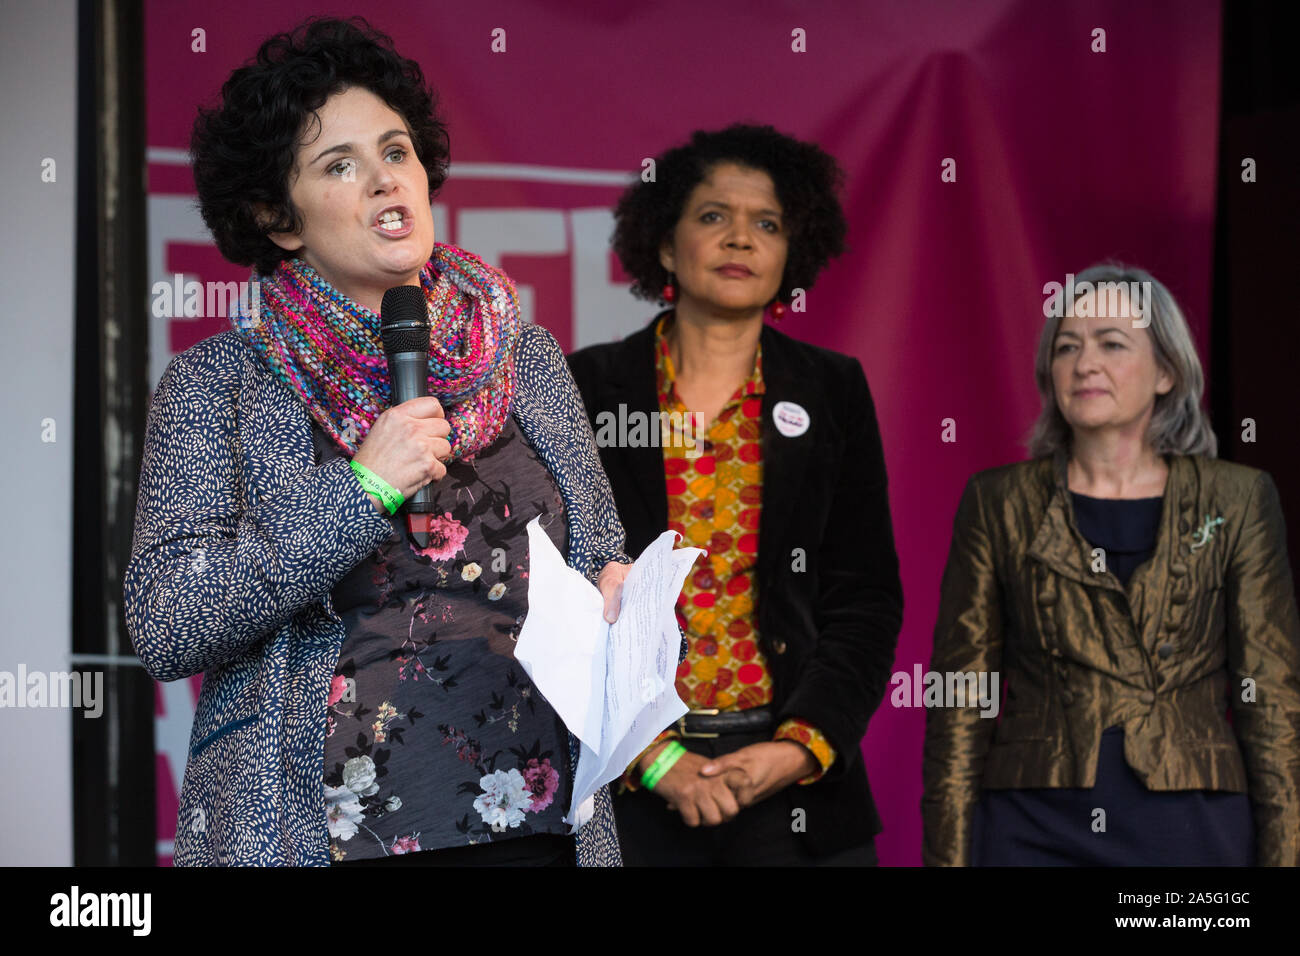 London, UK. 19 October, 2019. Claire Hanna, MLA for Belfast South, seen here with Chi Onwurah MP and Liz Saville Roberts MP, addresses hundreds of tho Stock Photo